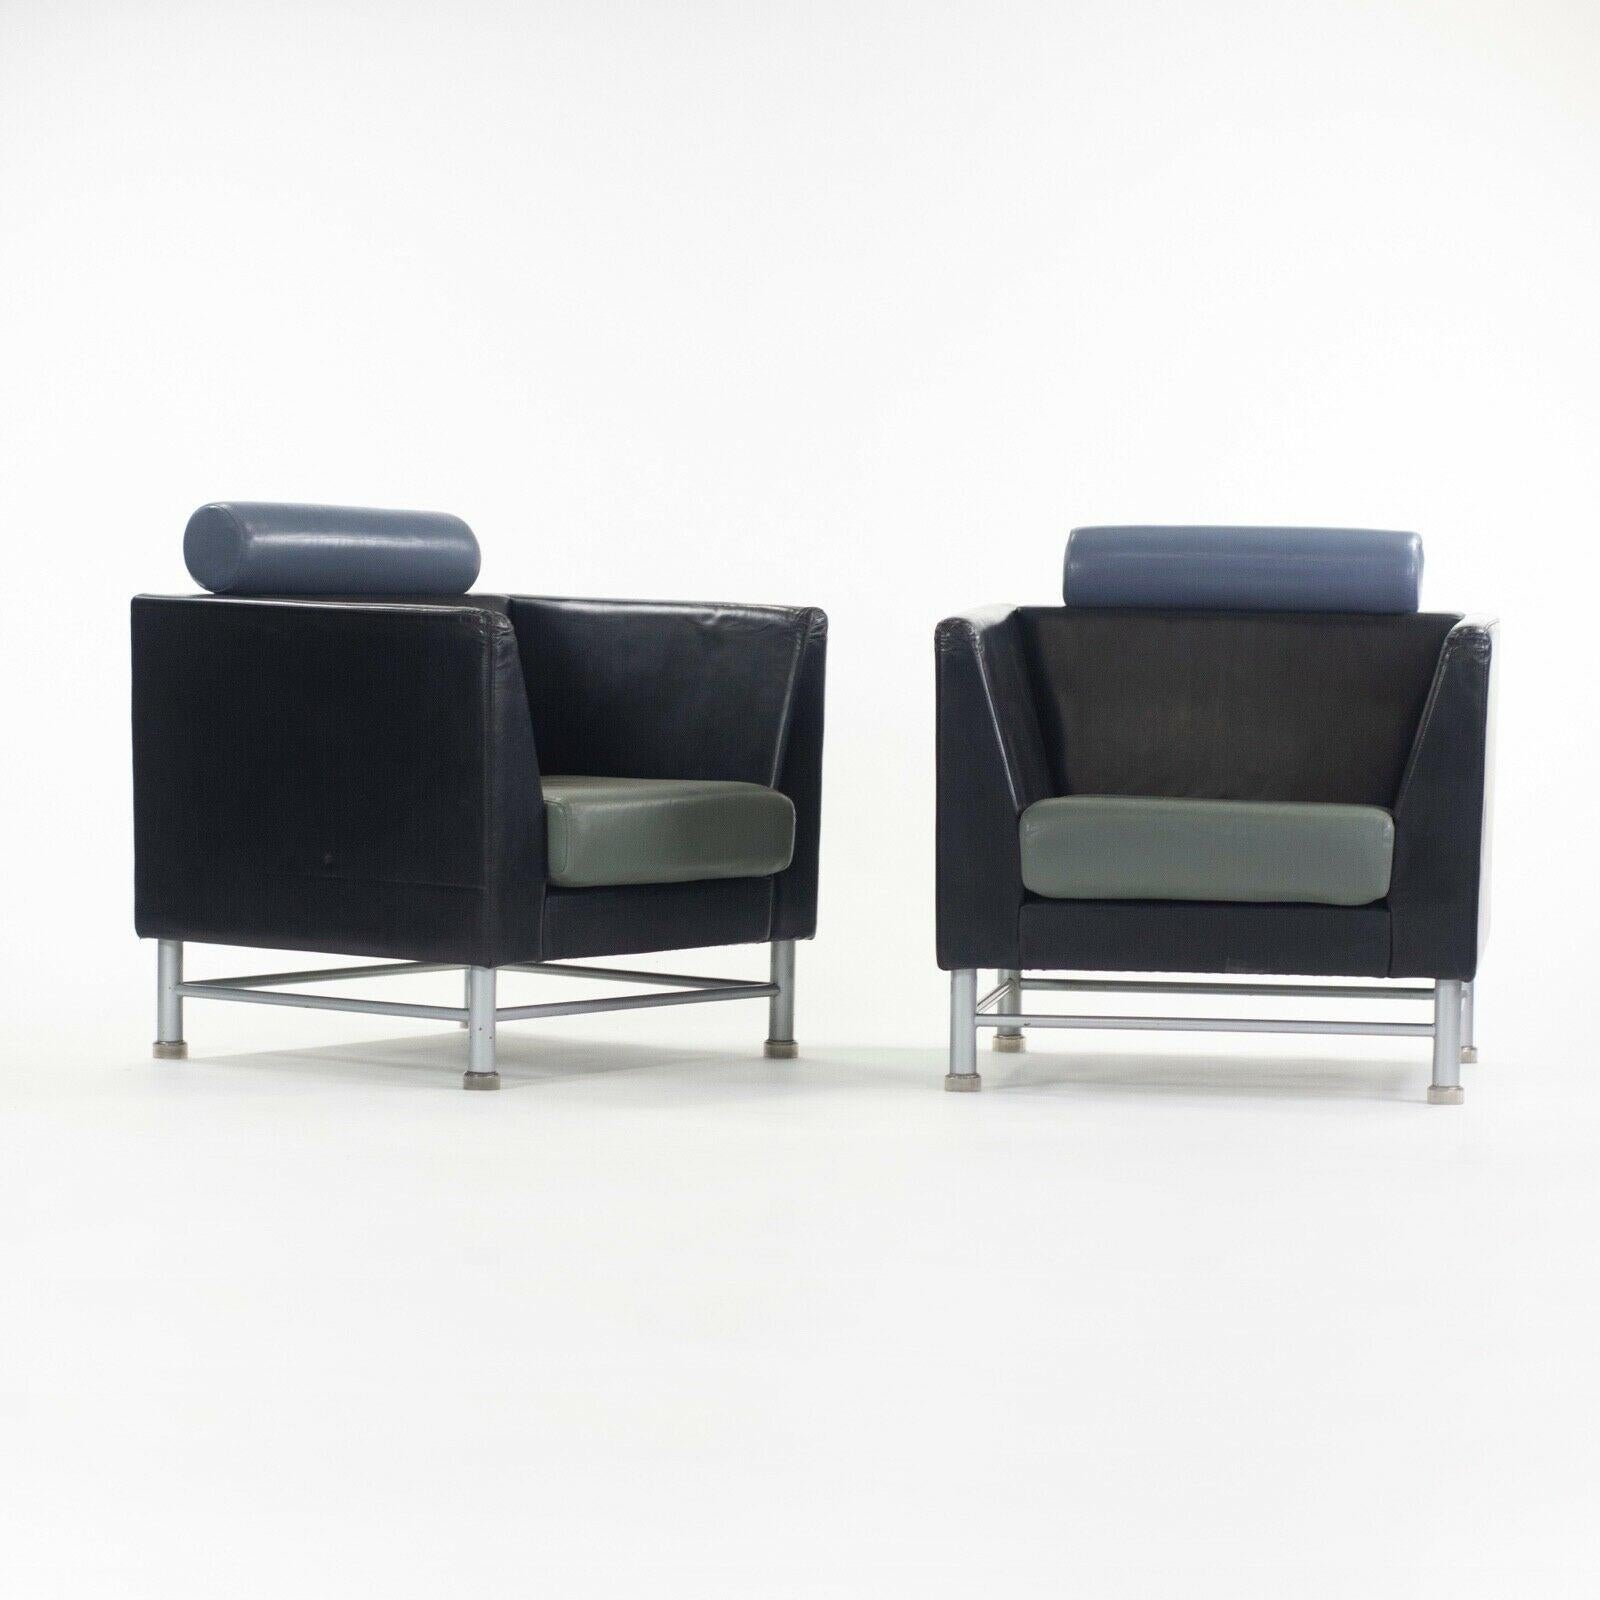 Listed for sale is a pair of gorgeous and original Ettore Sottsass Eastside lounge chairs, produced by Knoll International. These two lounge chairs came from the American Airlines executive lounge at Chicago O'Hare Airport. They are in lovely